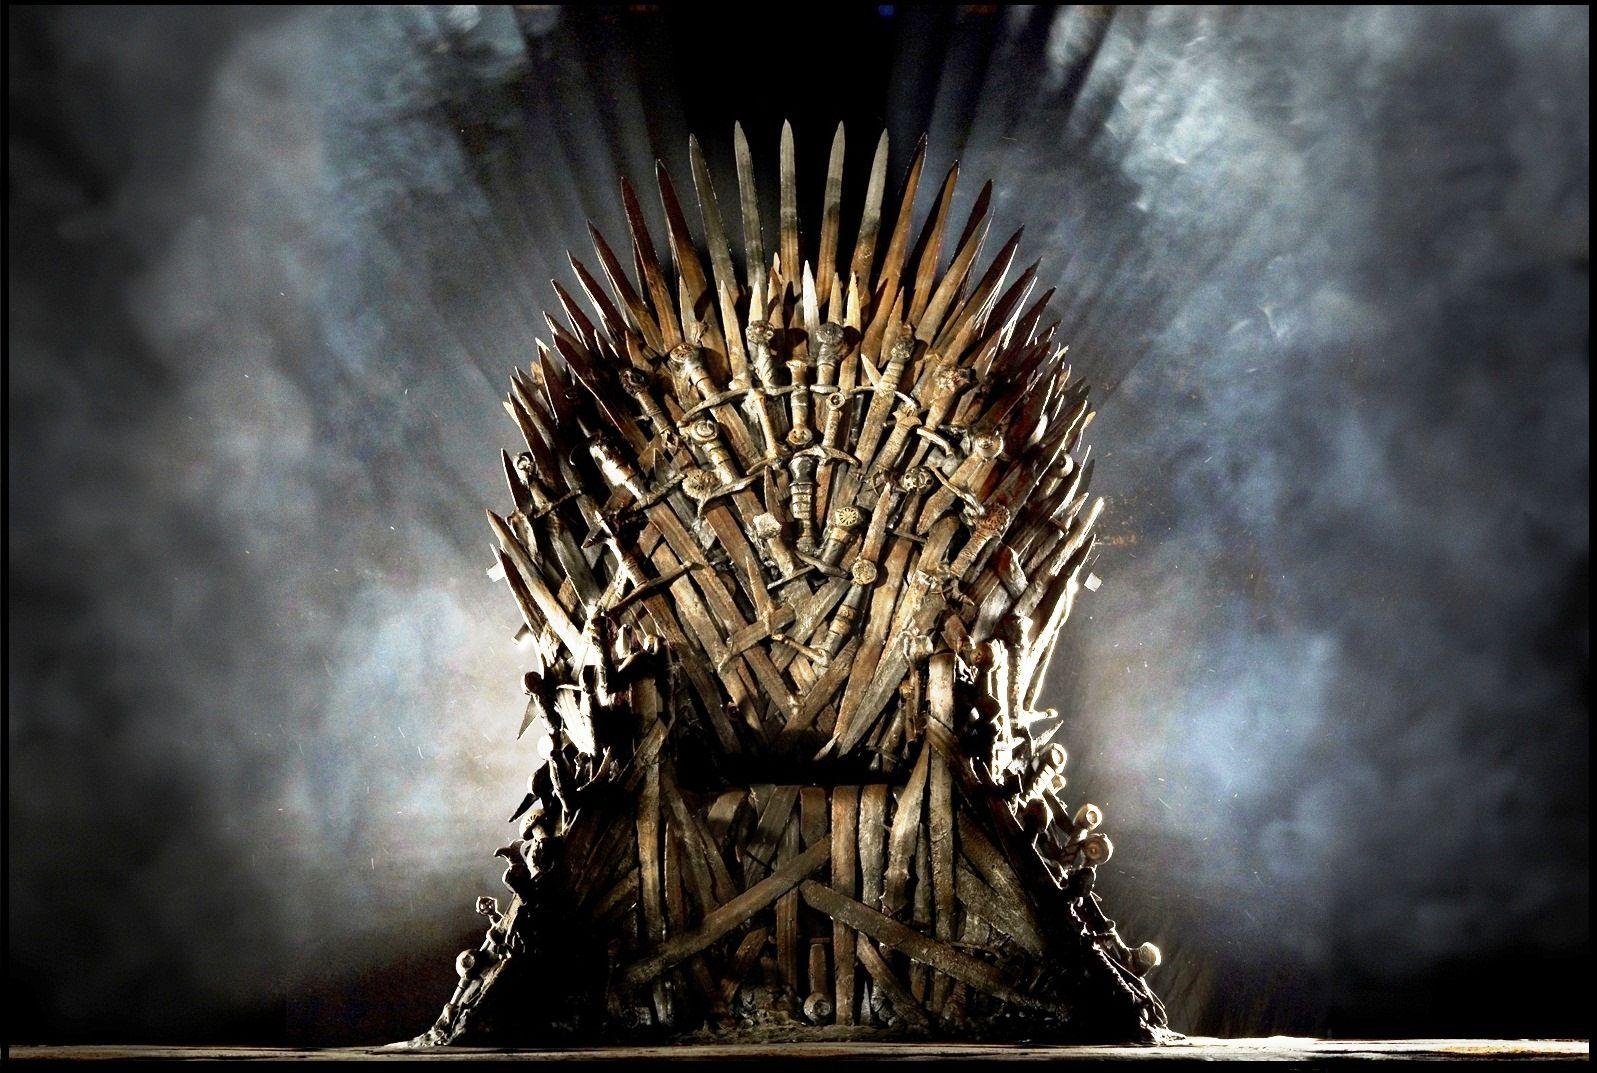 No One On 'Game Of Thrones' Will End Up With The Iron Throne